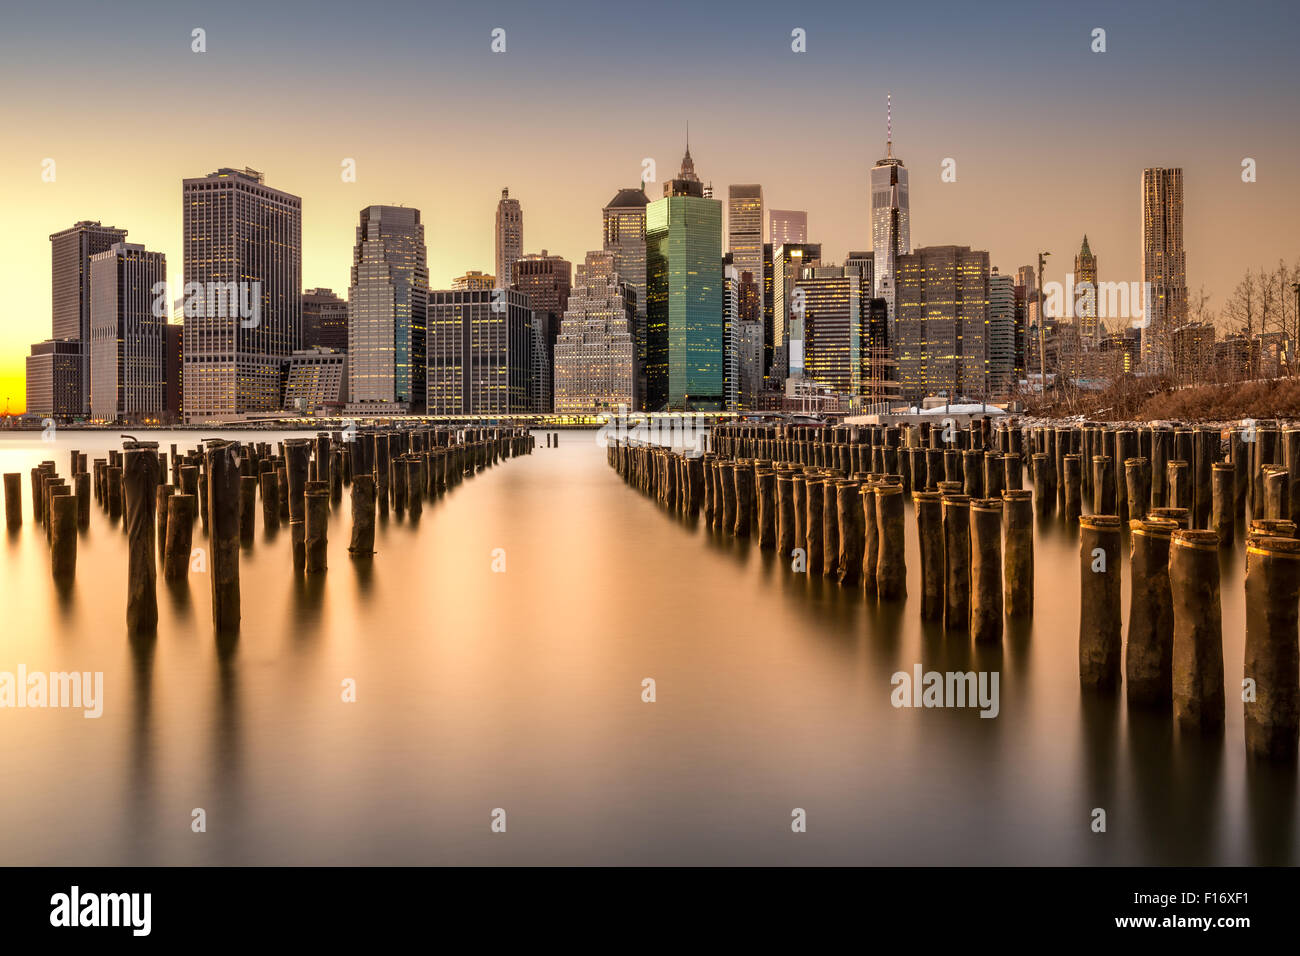 Long exposure of the Lower Manhattan skyline at sunset with an old Brooklyn pier in the foreground Stock Photo